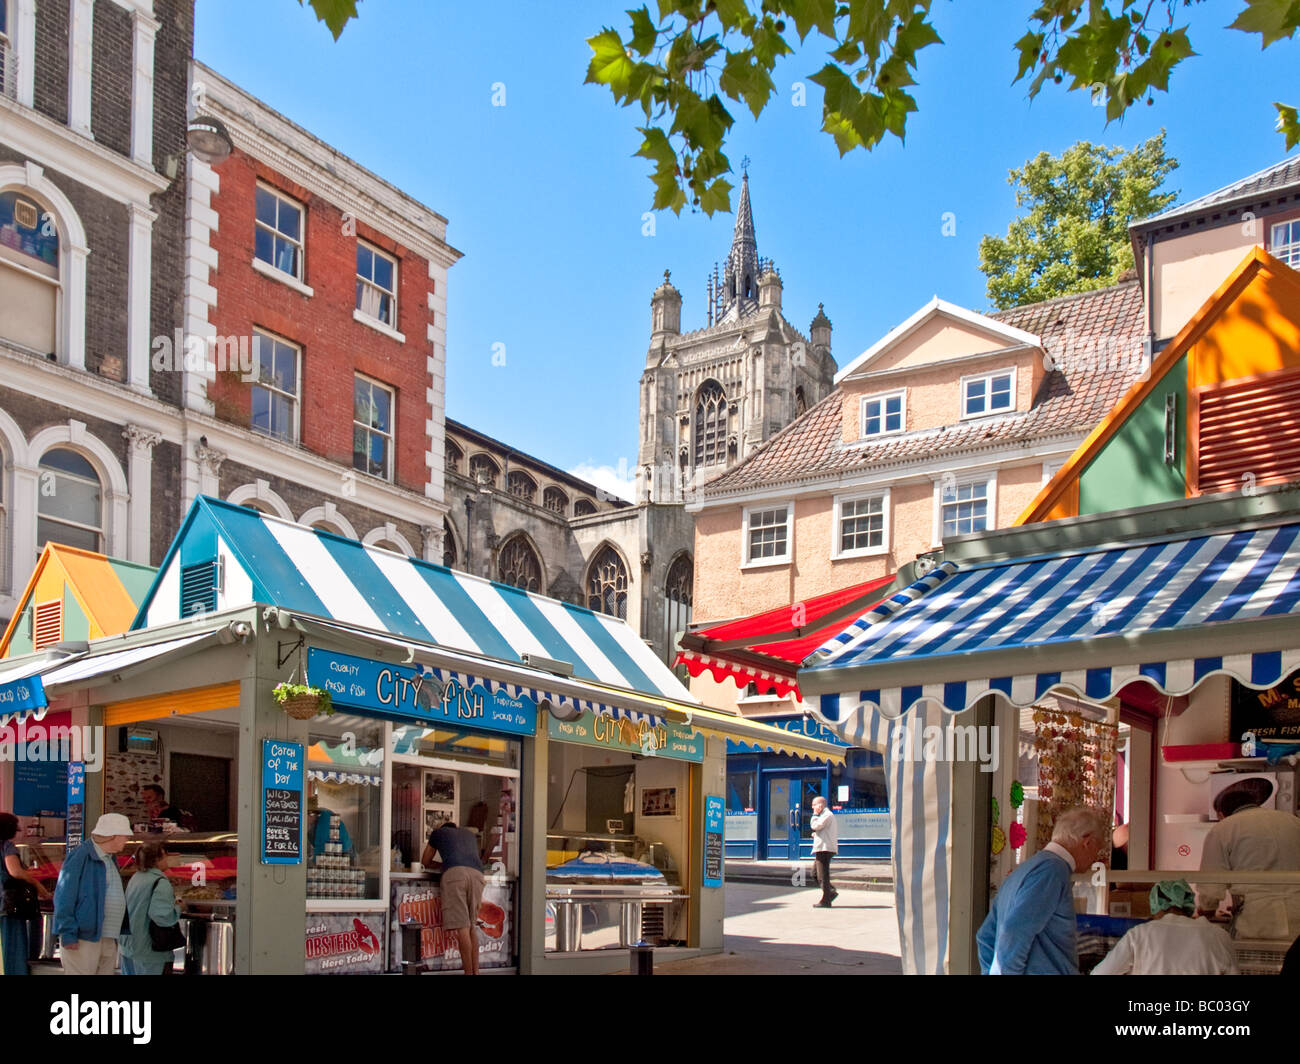 Corner of Norwich Market showing St Peter Mancroft Medieval Church, market stalls & Old buildings Stock Photo